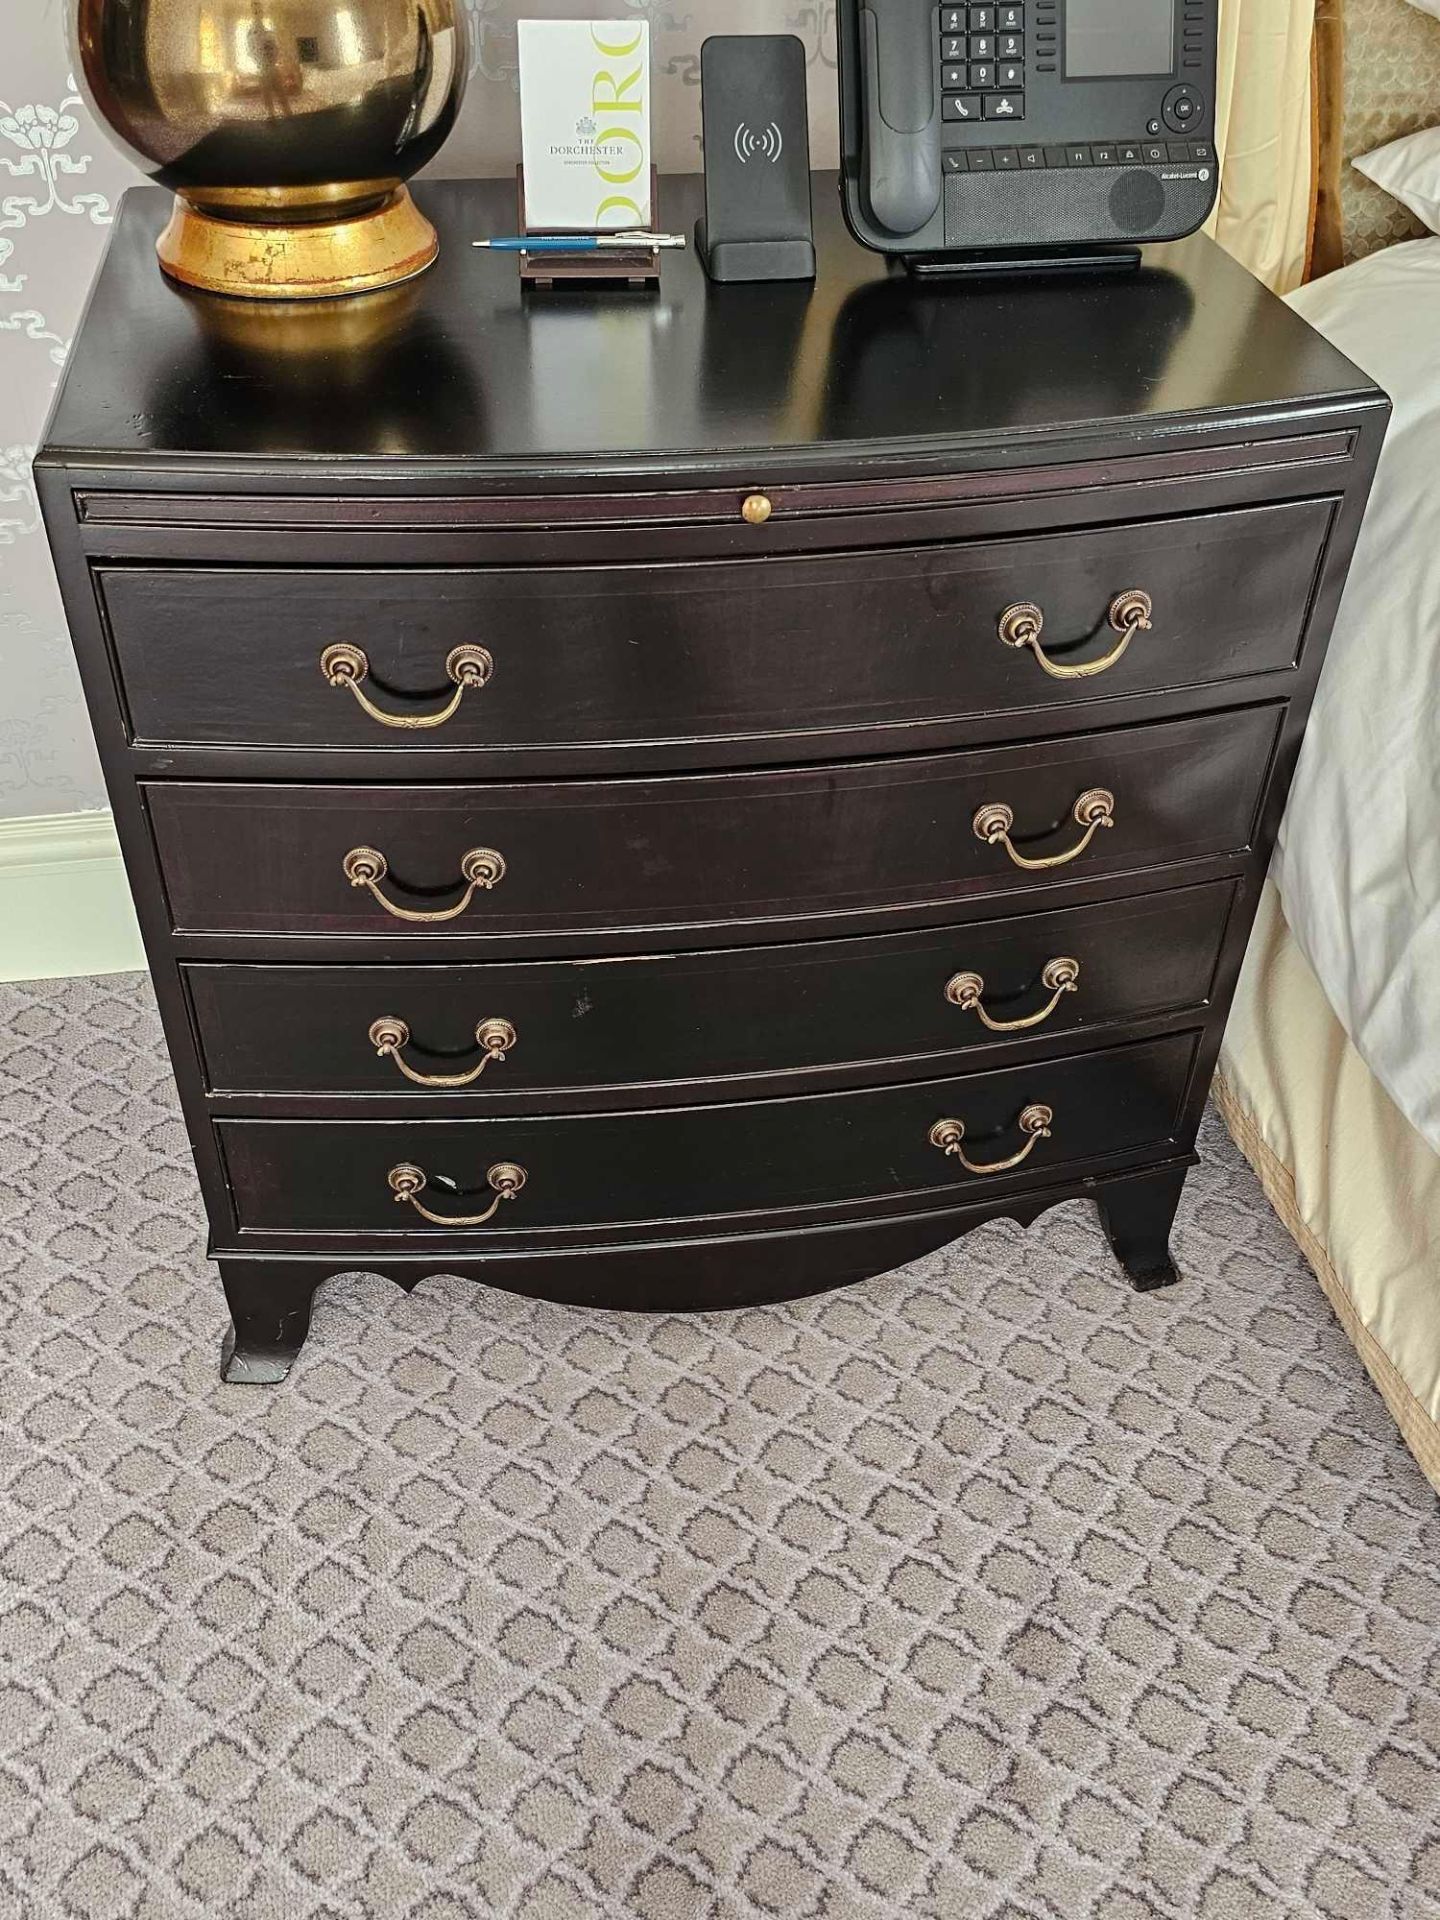 A Pair Four Drawer Commode Chests Raised By Four Block Feet With A Square Carved Motif And - Image 3 of 5